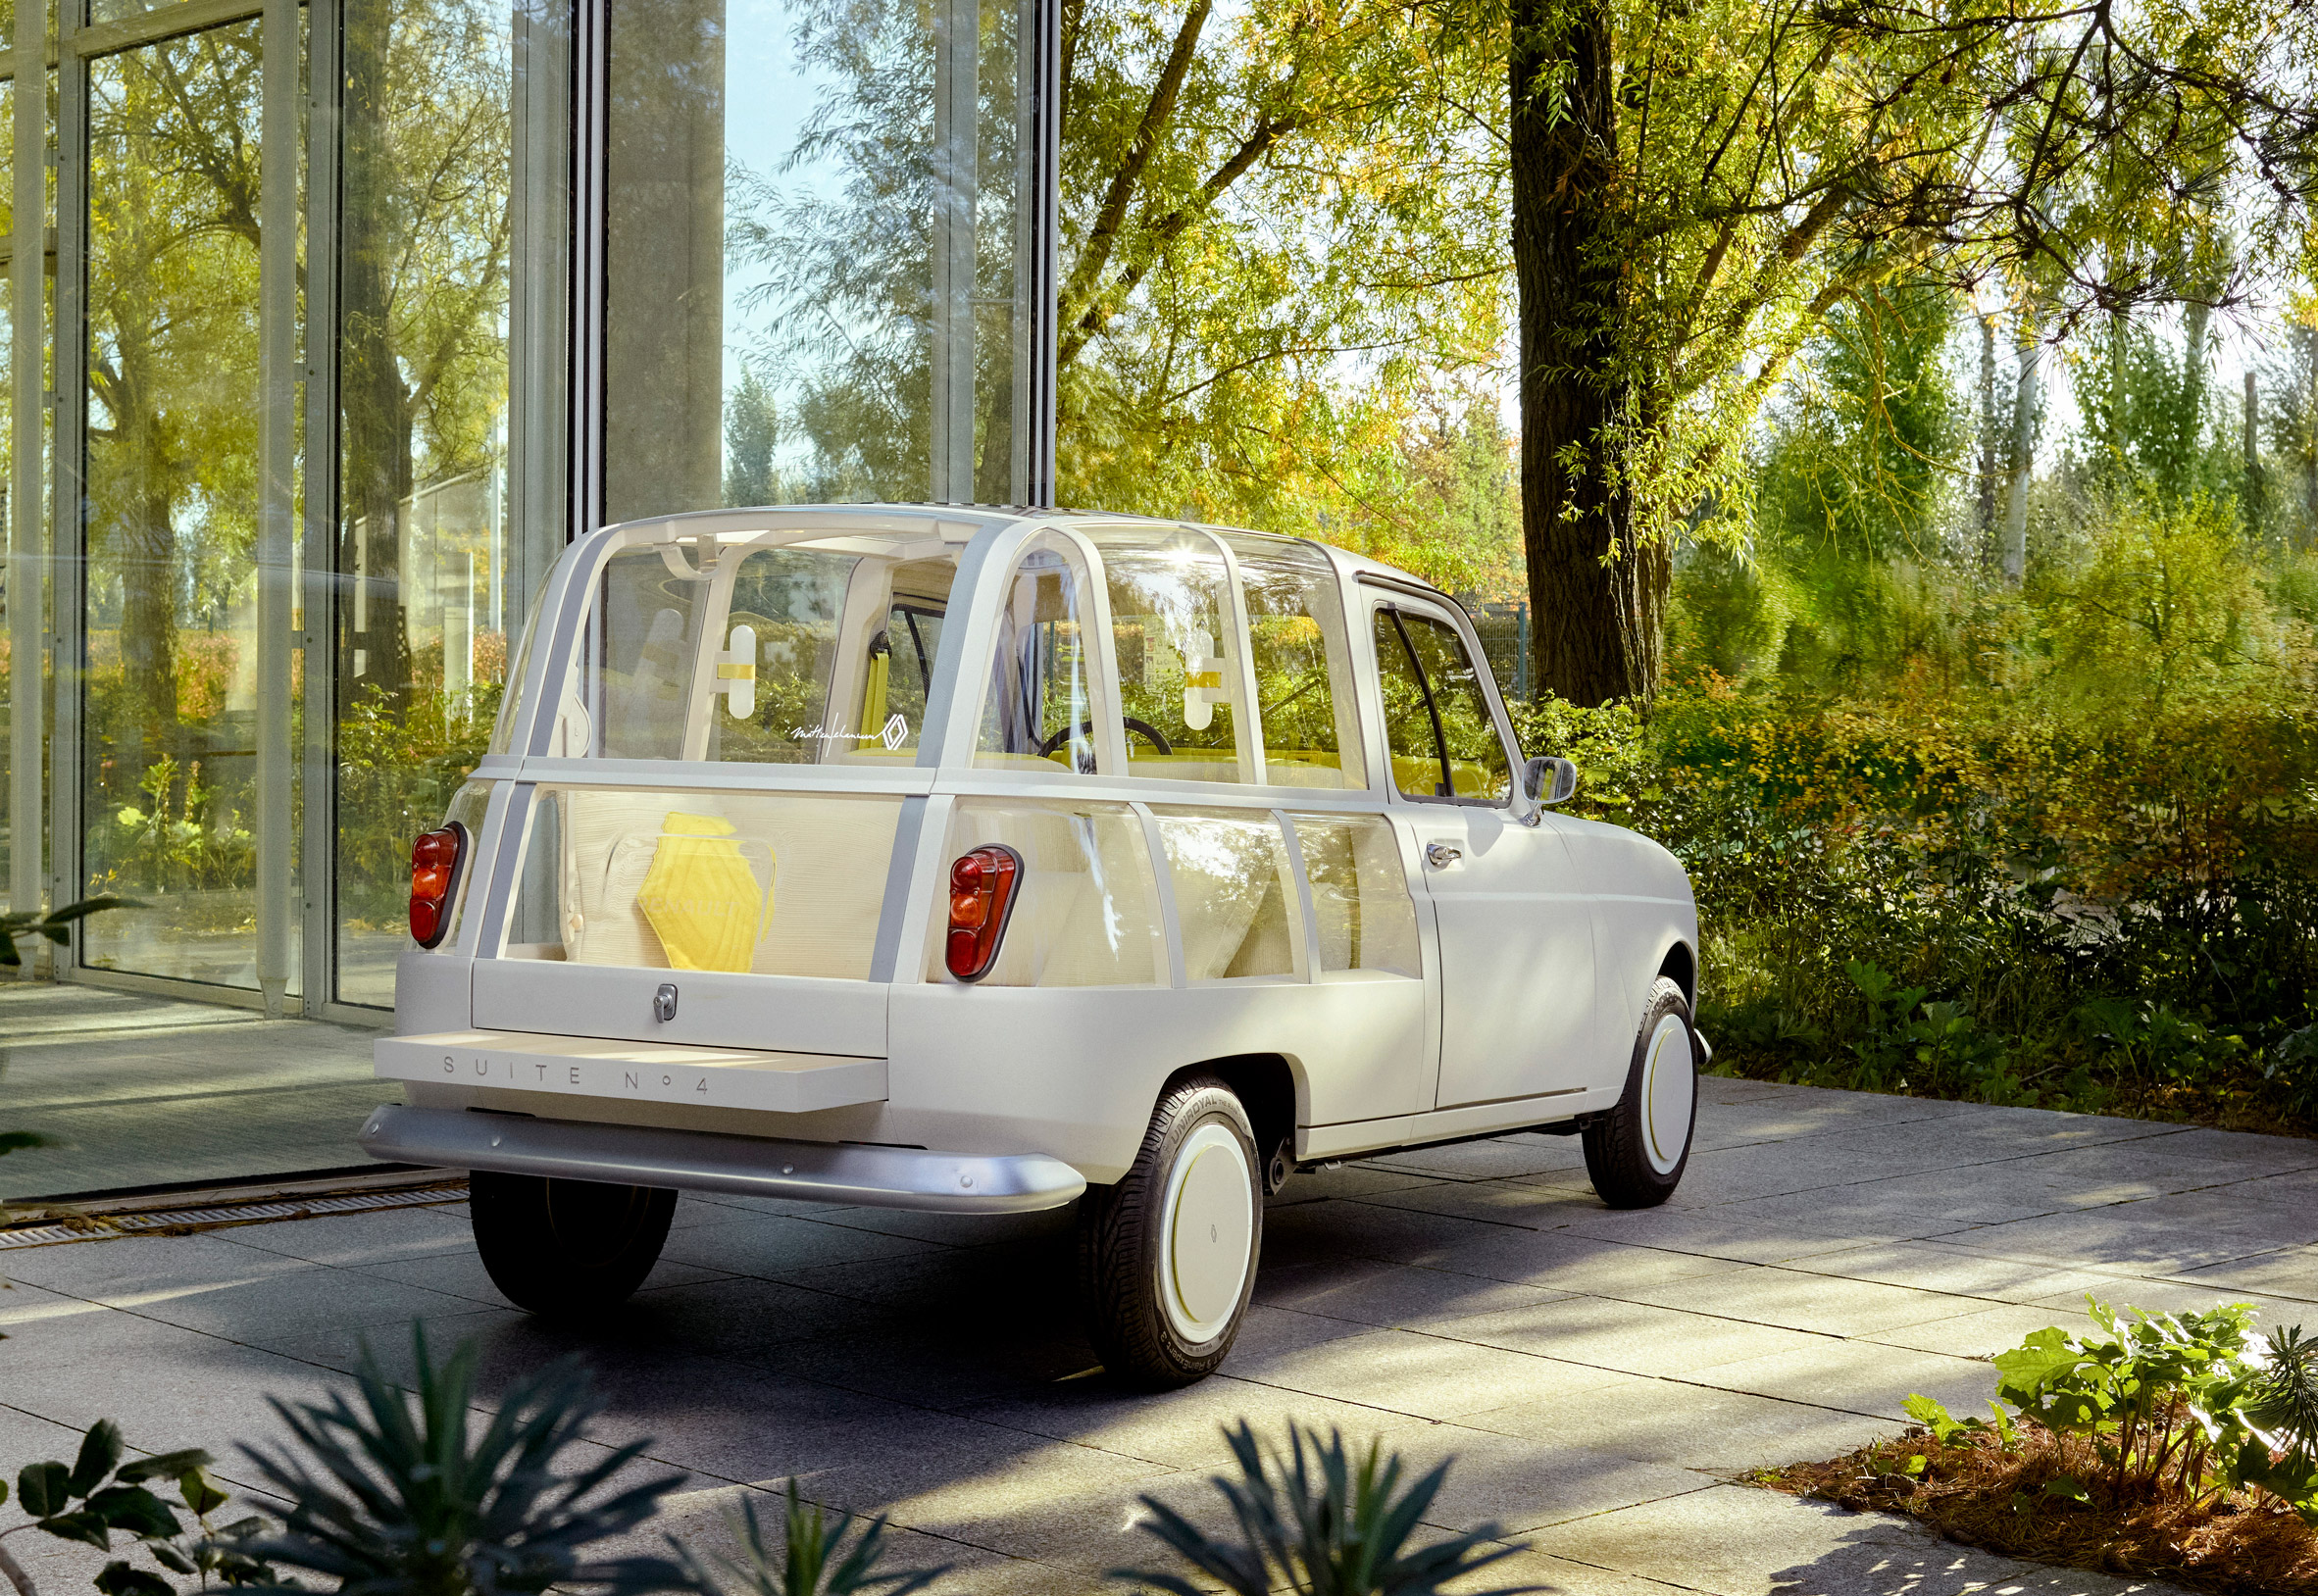 Renault 4L with cream and transparent body parked in a forest setting